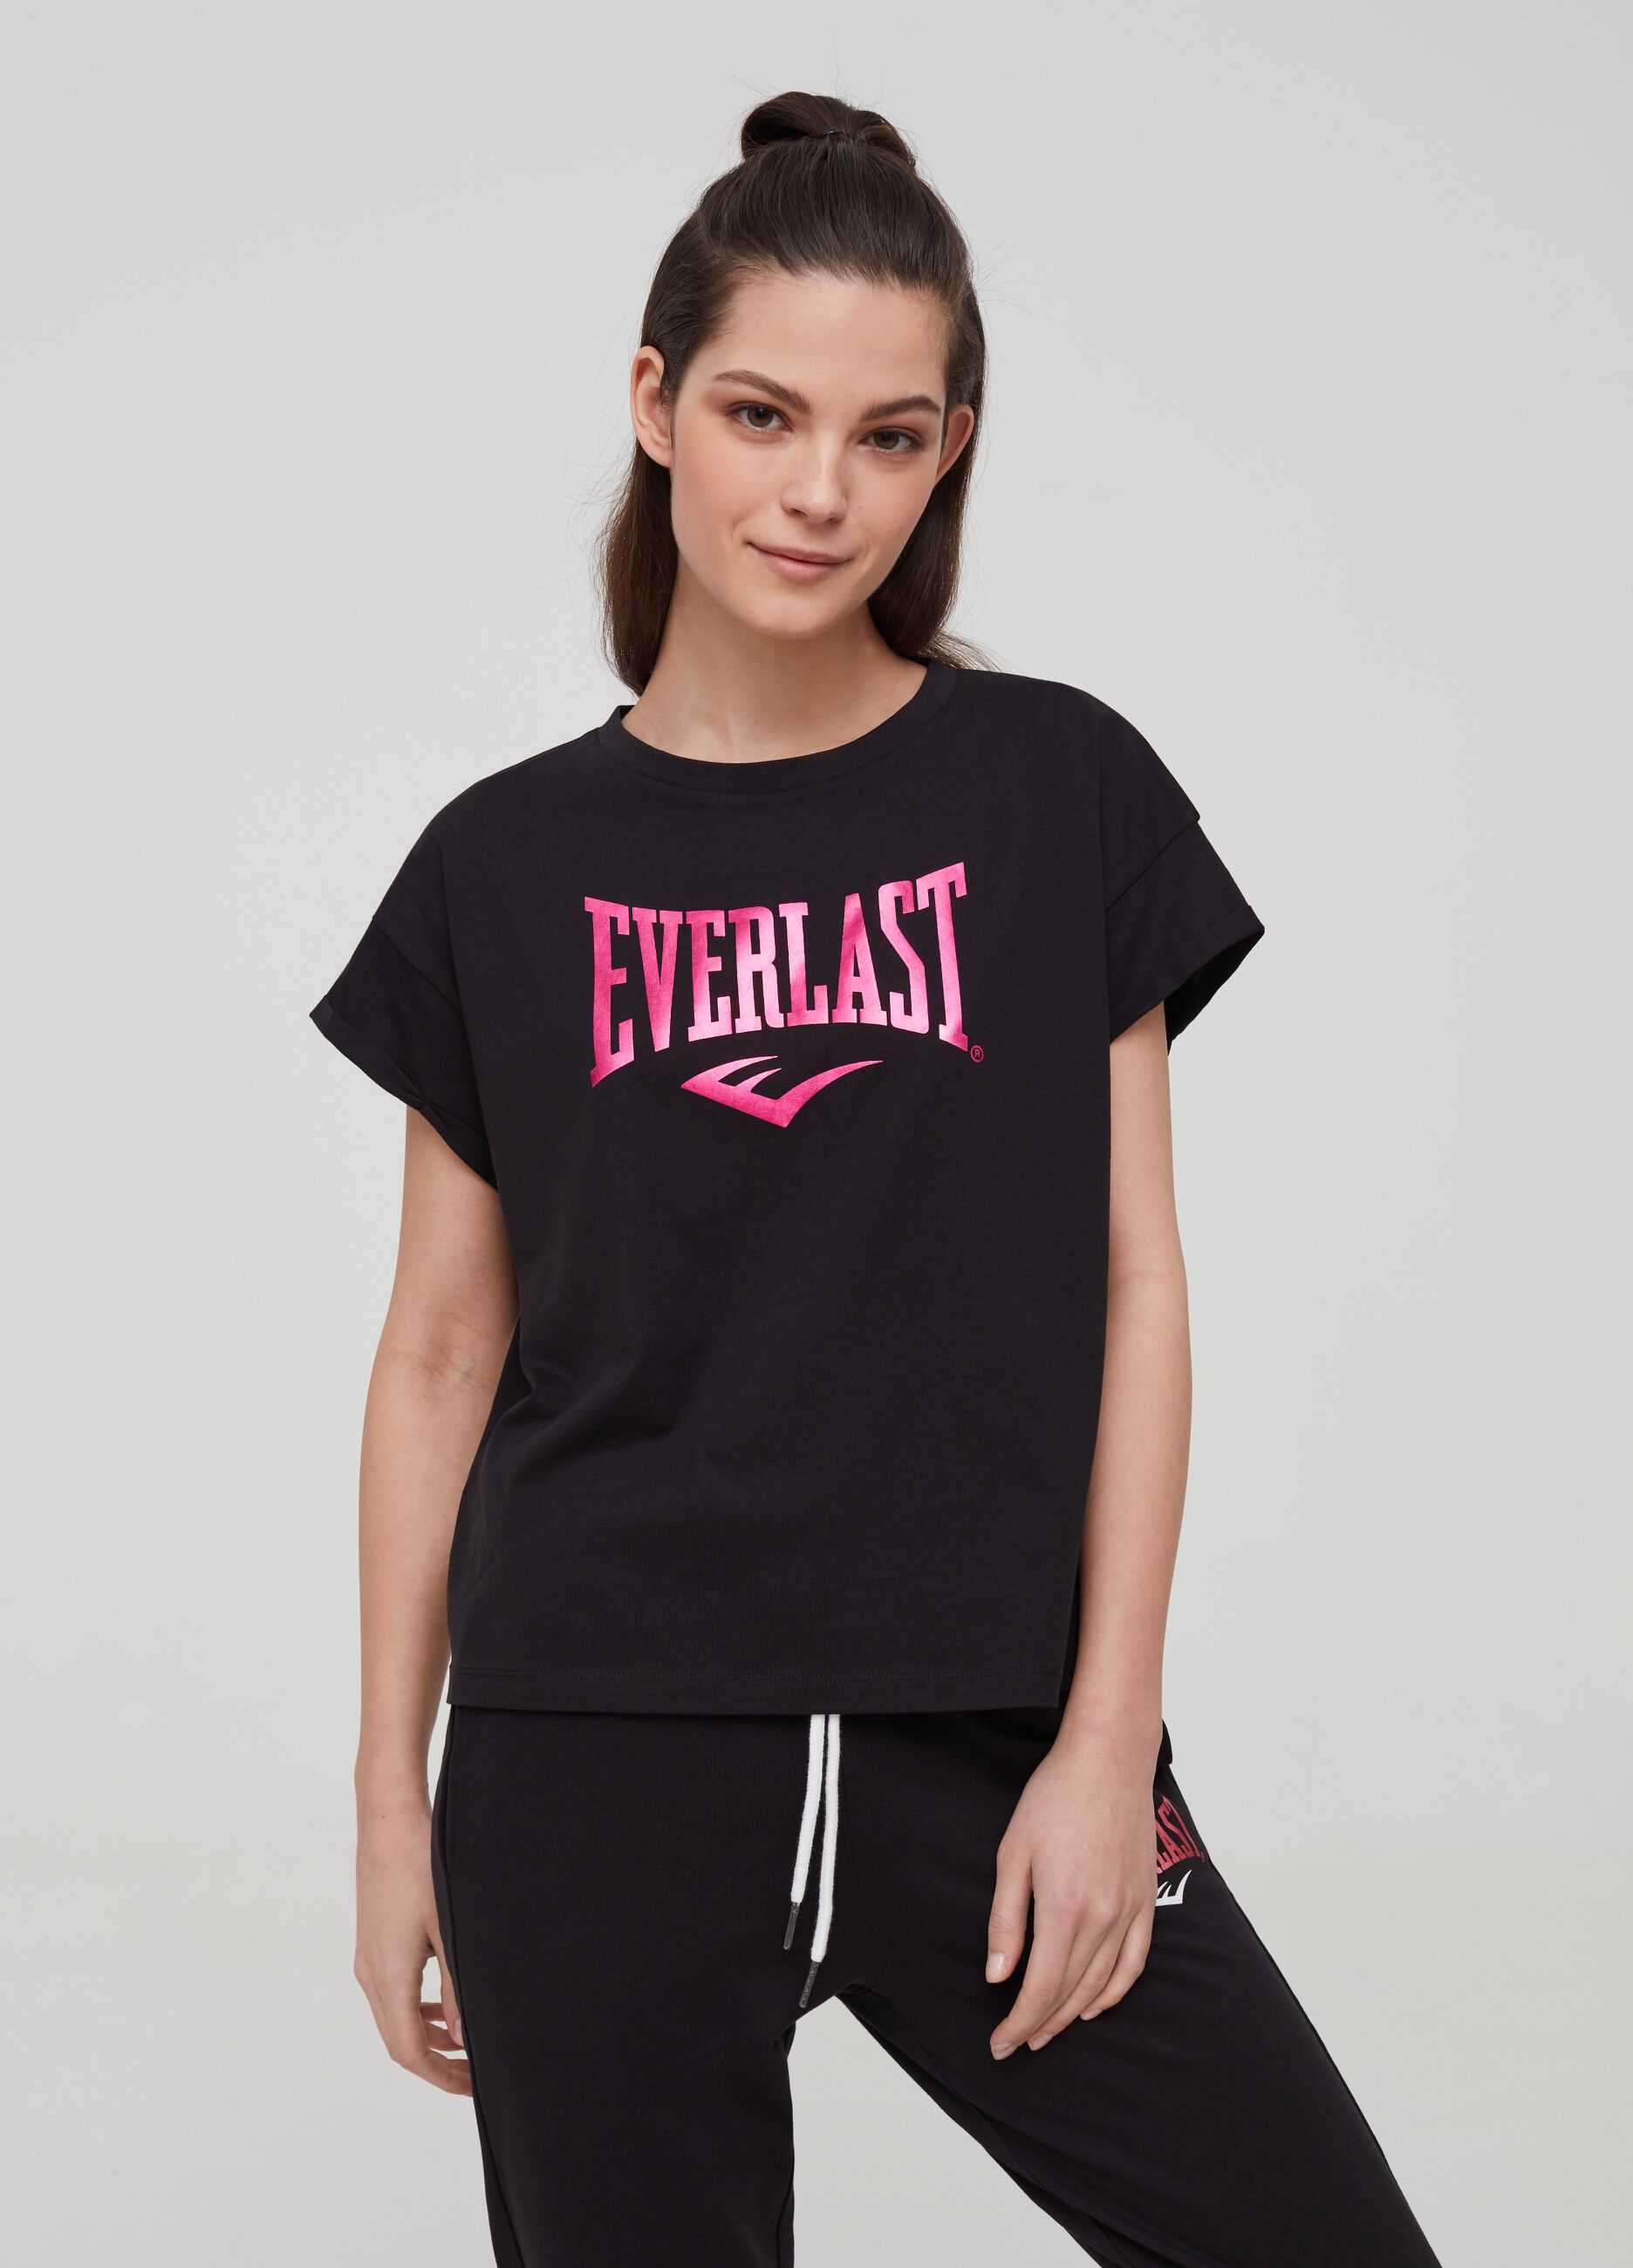 100% cotton T-shirt with Everlast print